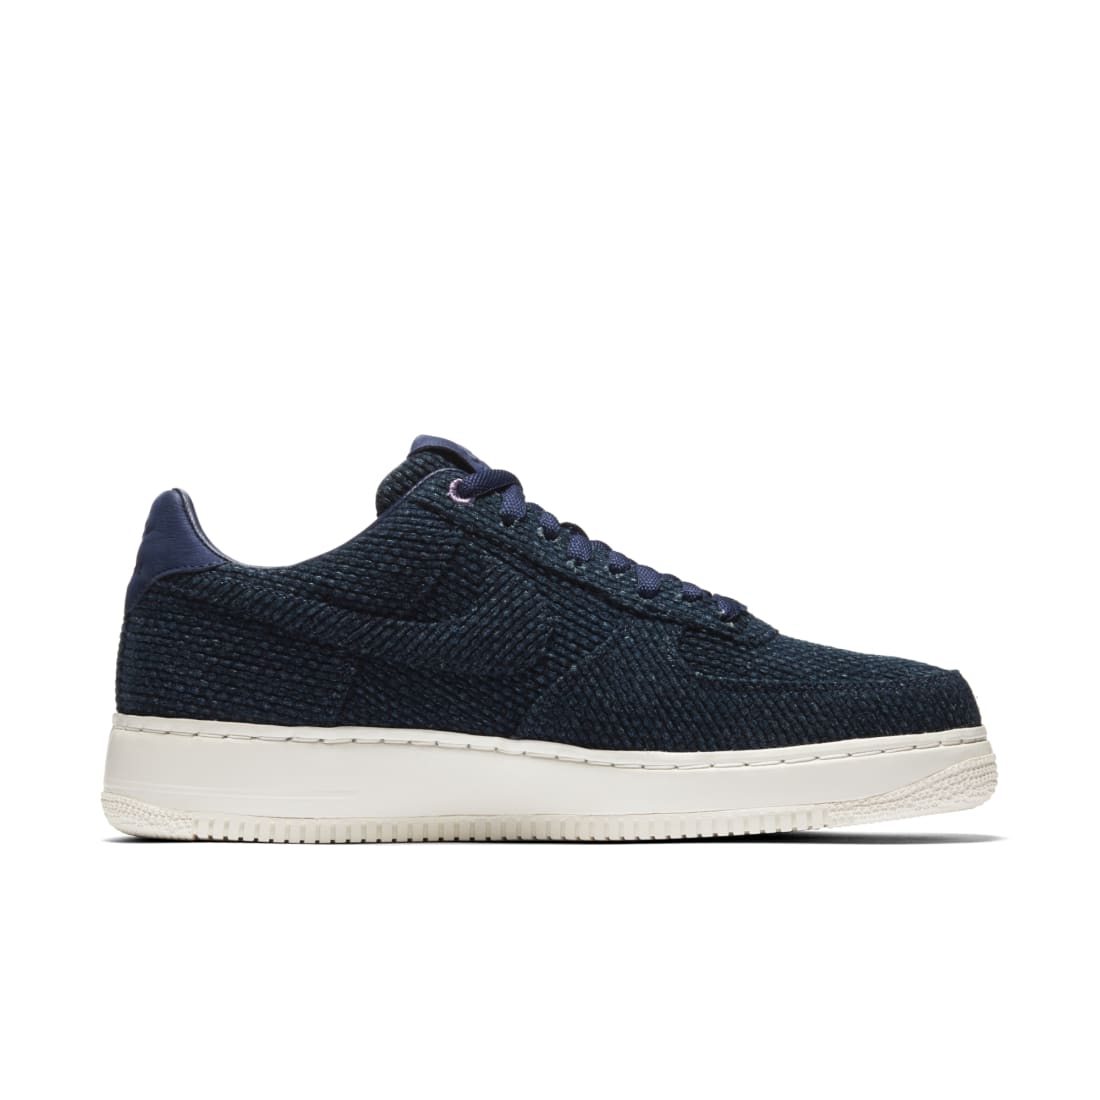 Nike Air Force 1 Low Aizome Navy | Nike | Sole Collector